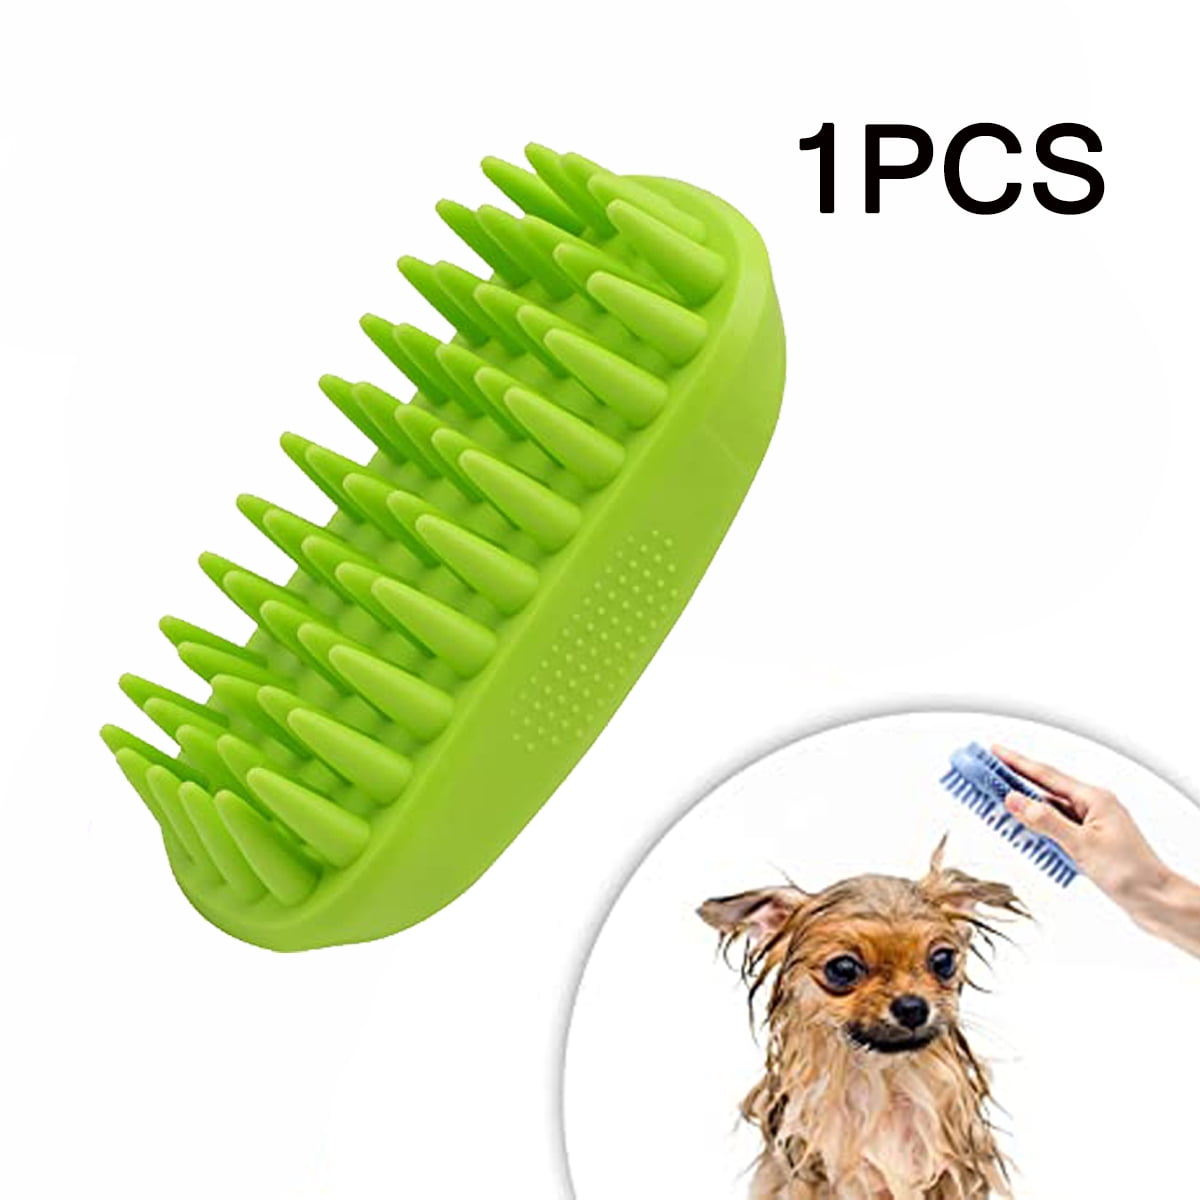 Lilpep Pet Shampoo Bath Brush Soothing Massage Rubber Comb with Adjustable  Ring Handle for Long Short Haired Dogs and Cats Grooming, 2 PCS